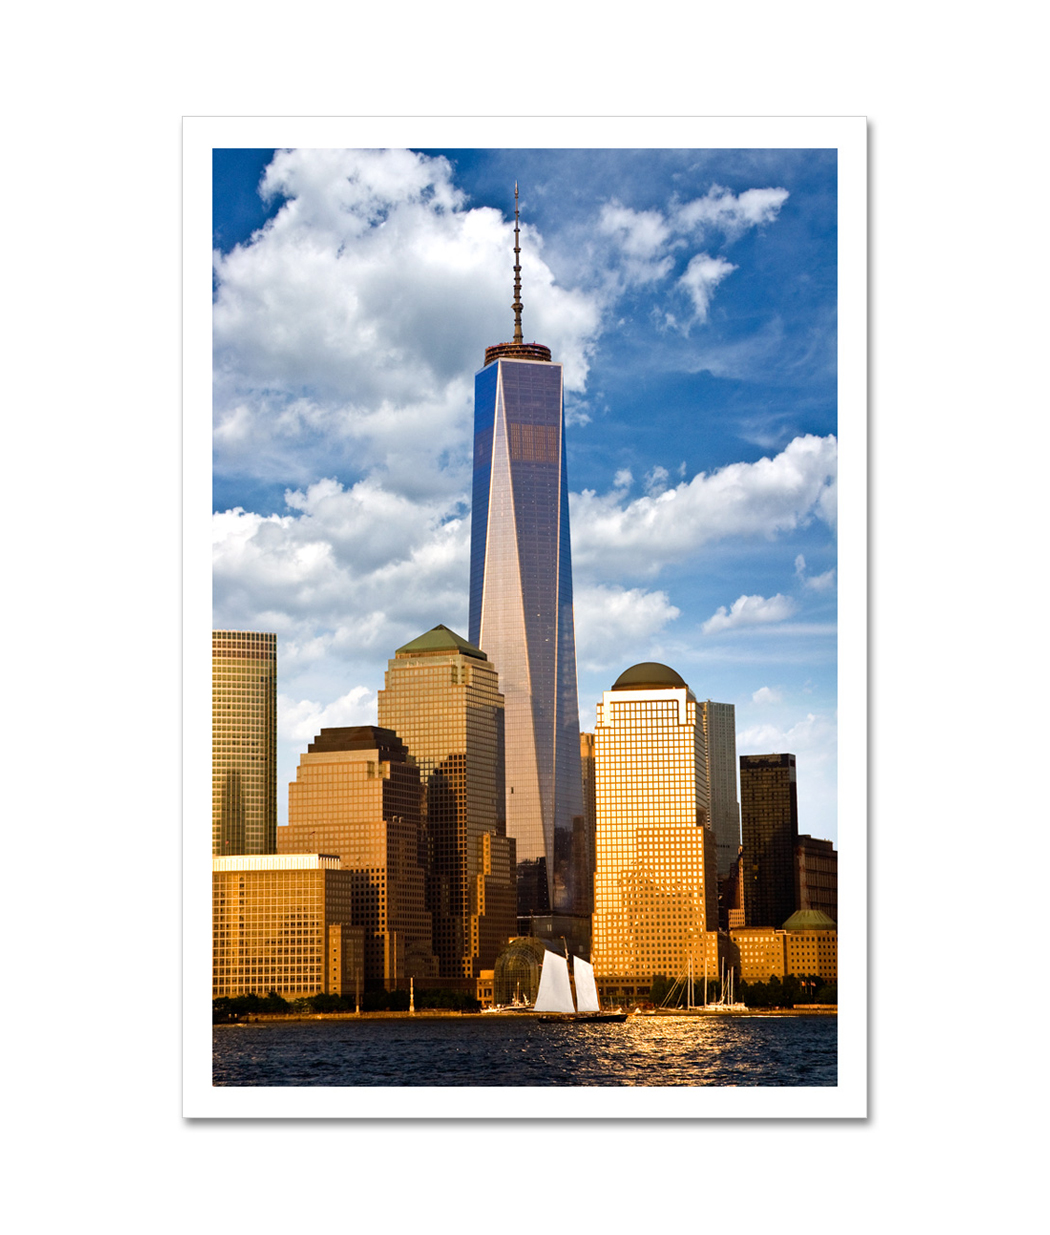 Freedom Tower Sunset New York – Art Photo Print Poster – NY Poster Inc